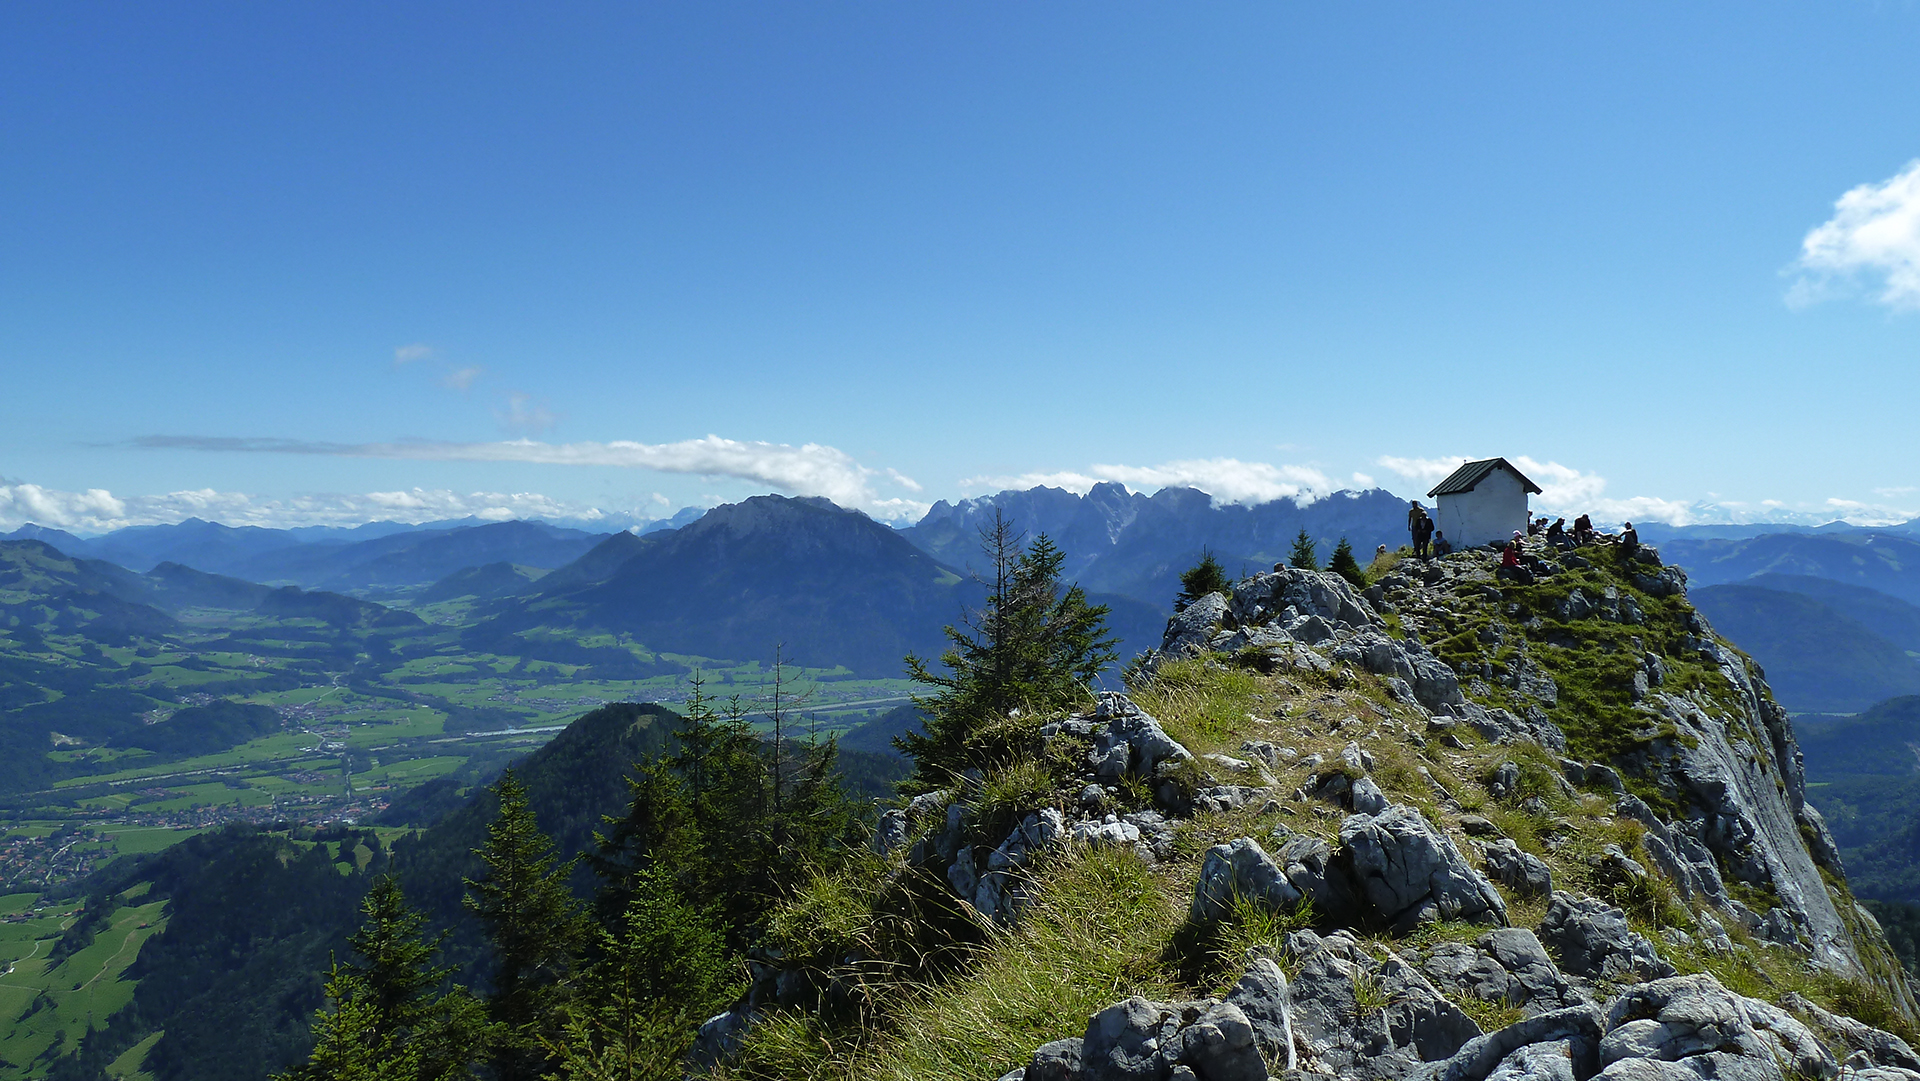 From the top of the mountains we see the wonderful Bavarian Alps with different eyes